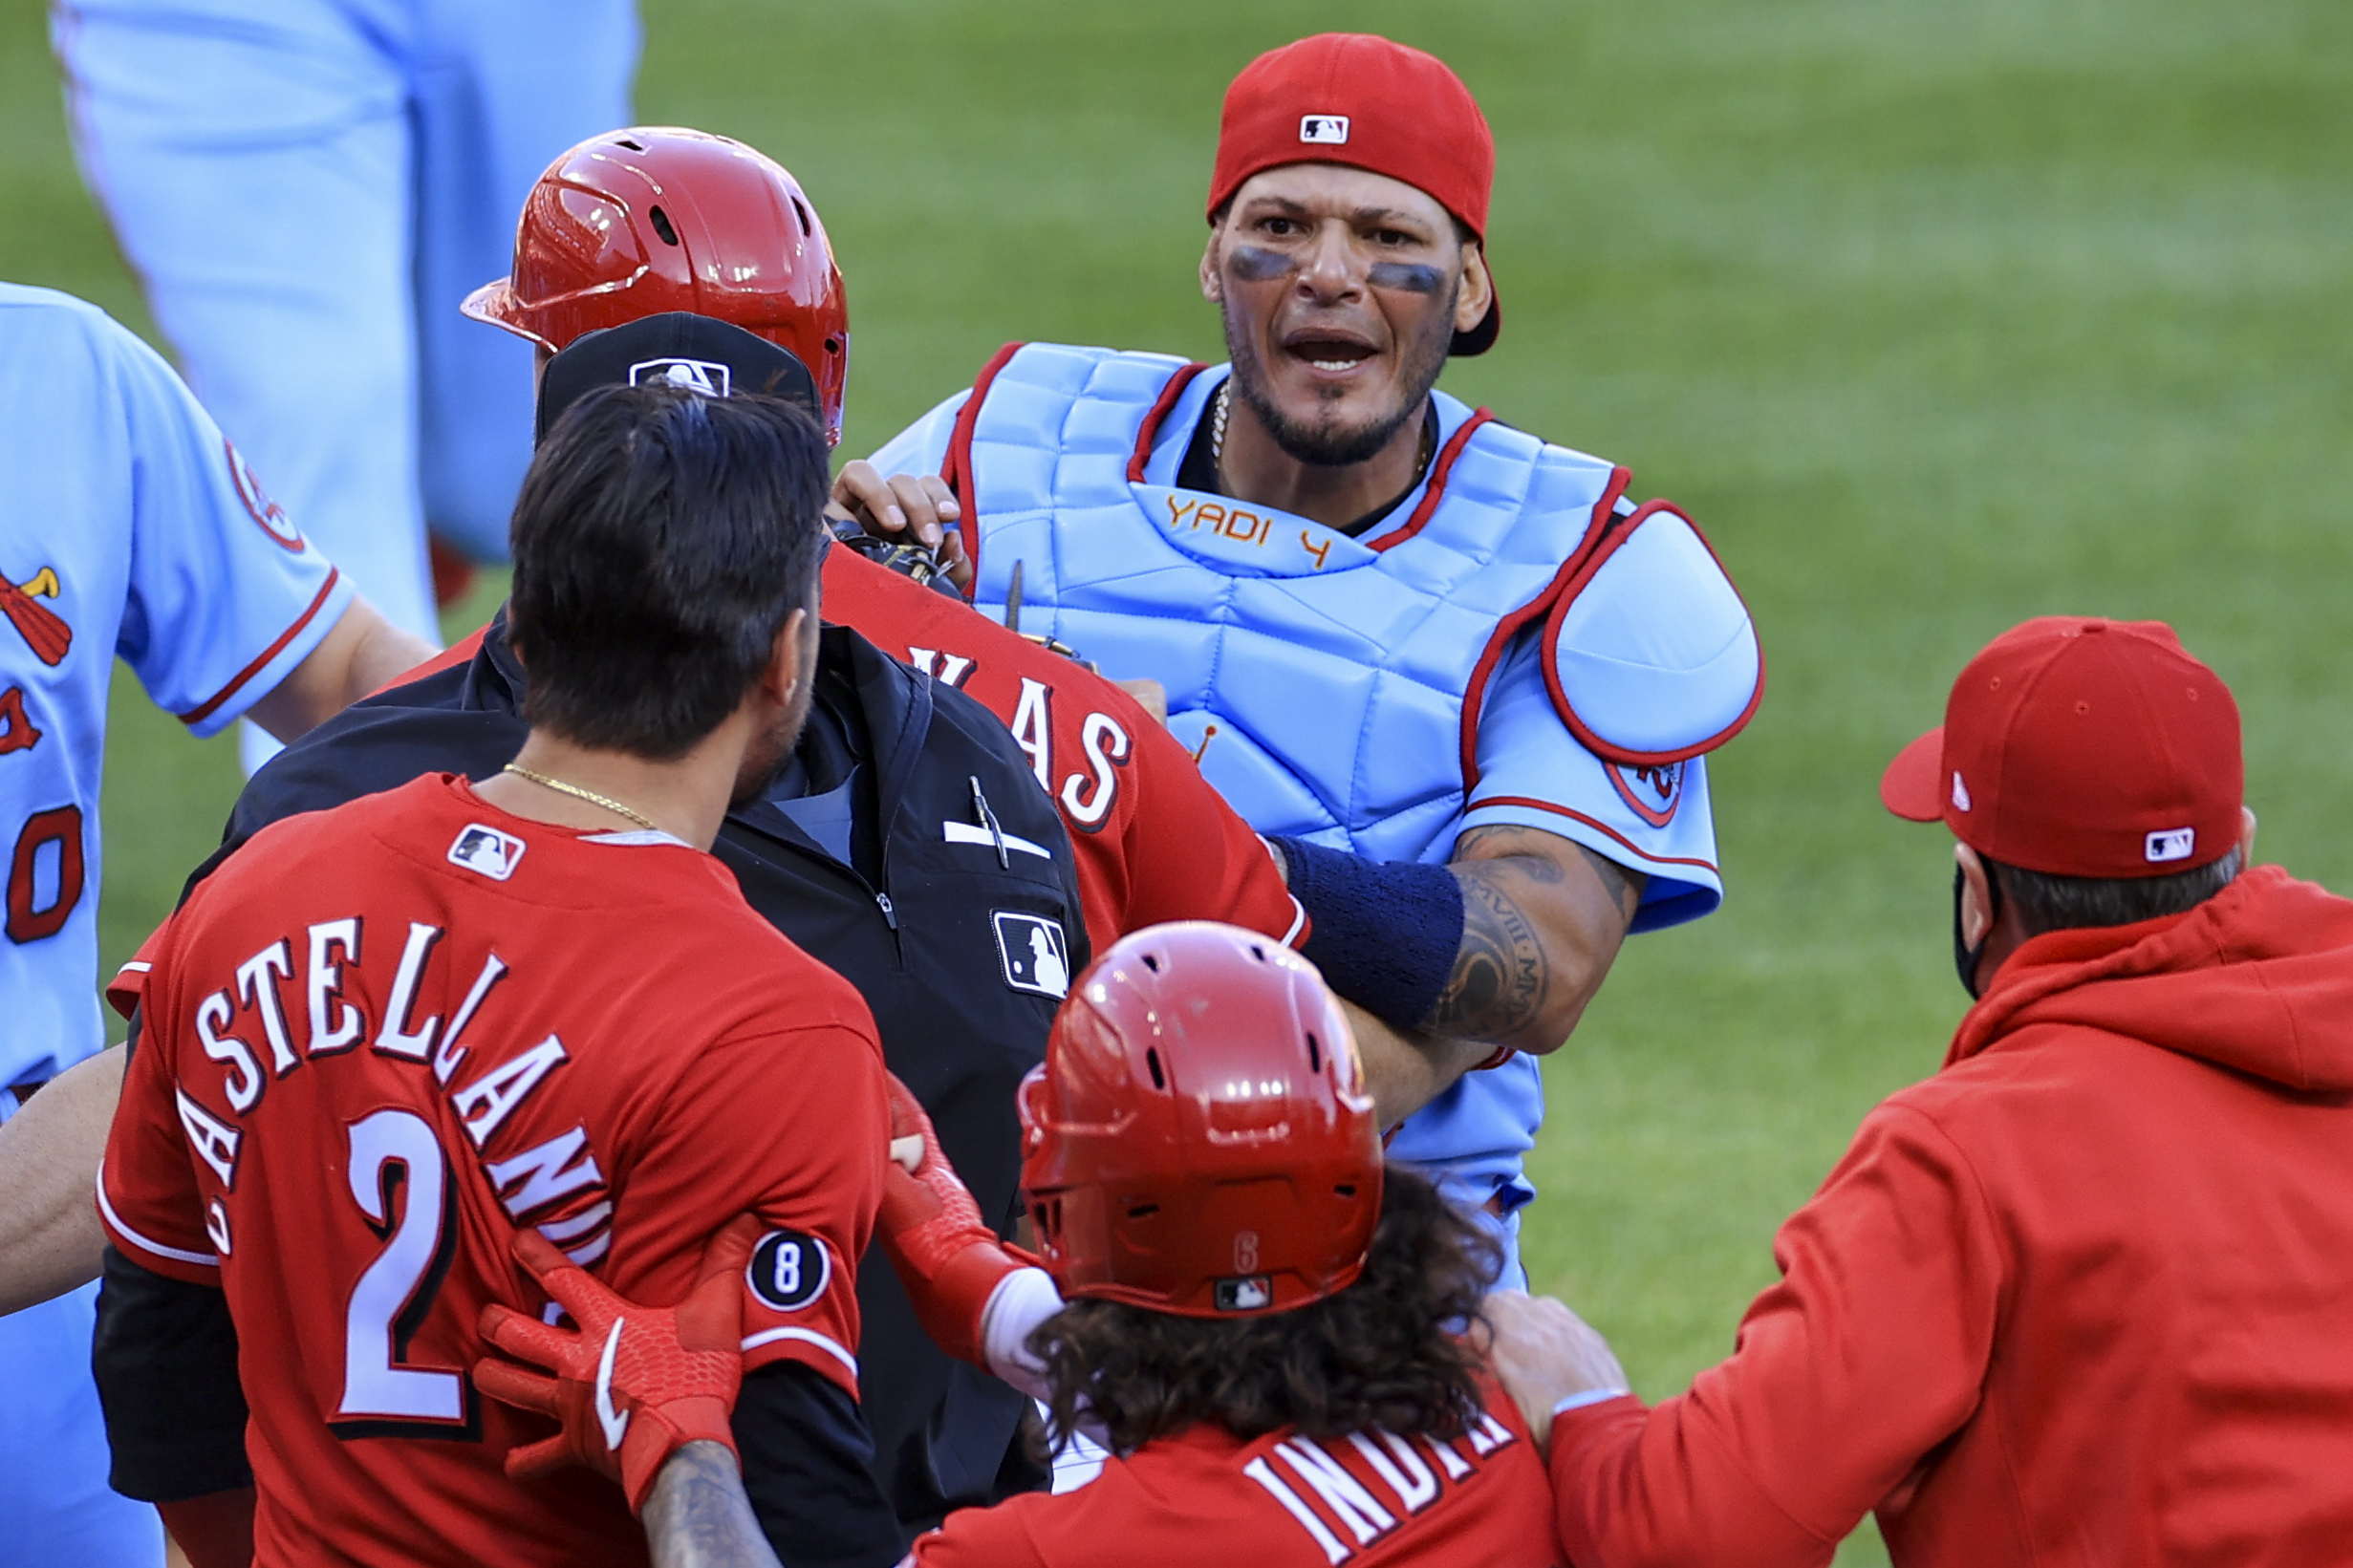 Castellanos appealing two-game ban after Reds-Cards brawl